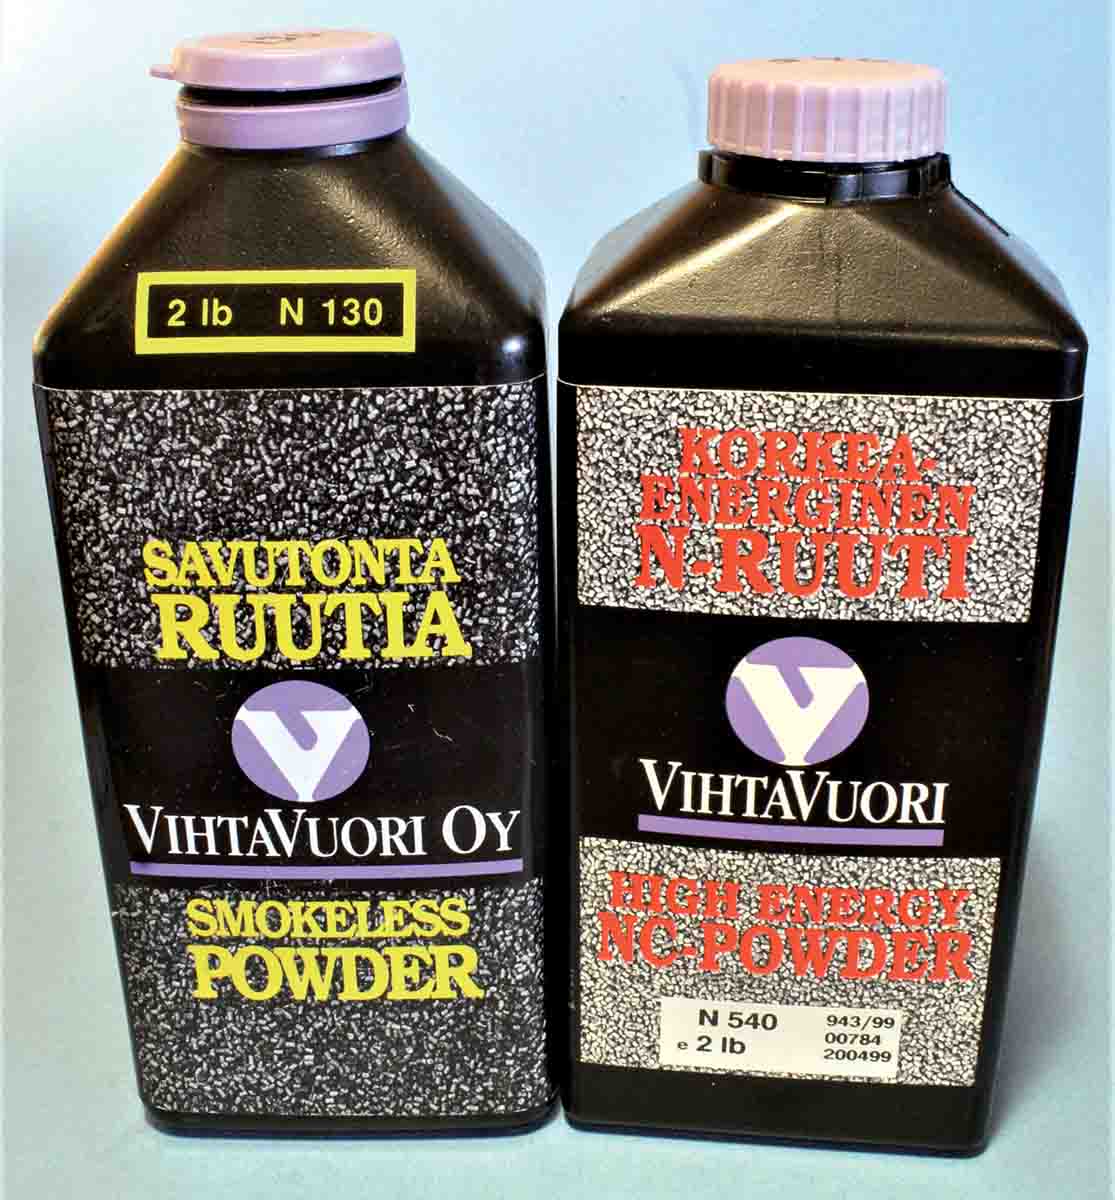 Vihtavuori makes two main lines of rifle powders, the 100 series including N130 (left), which are all single-based, and the 500 series including N540, which are double-based with added nitroglycerin for more velocity.